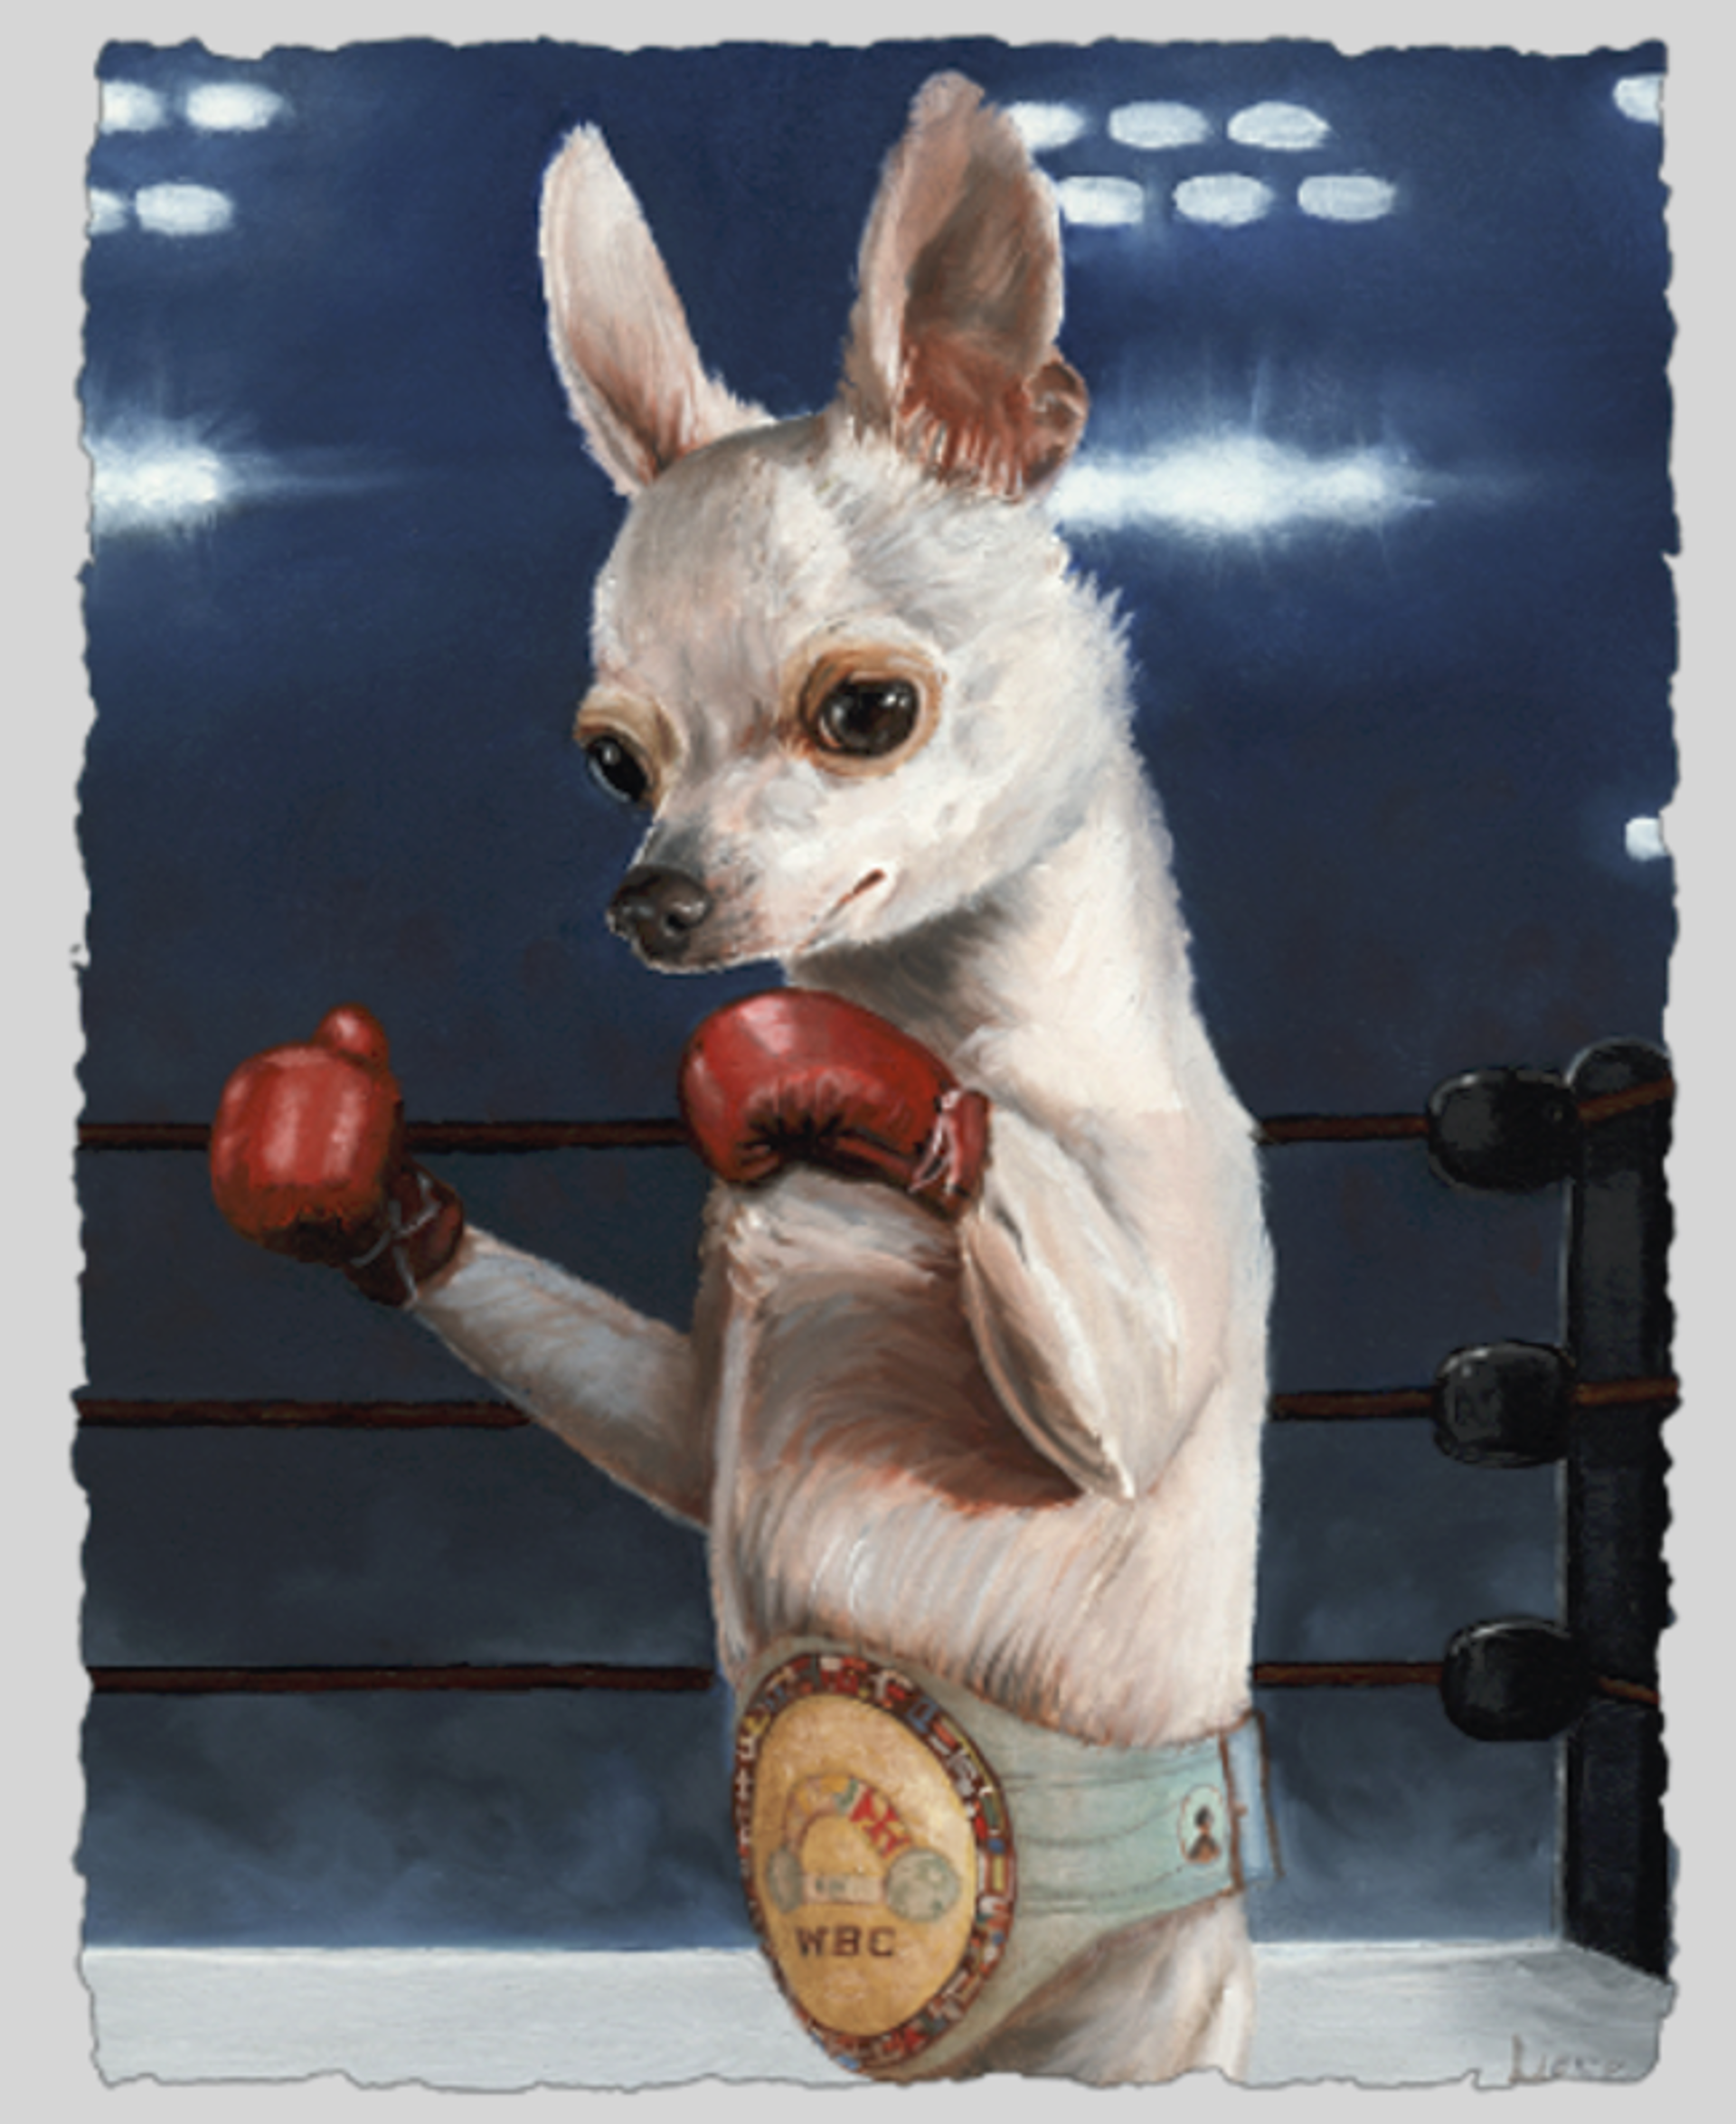 The Champ (Giclee on Deckled Paper) G.O. by Liese Chavez